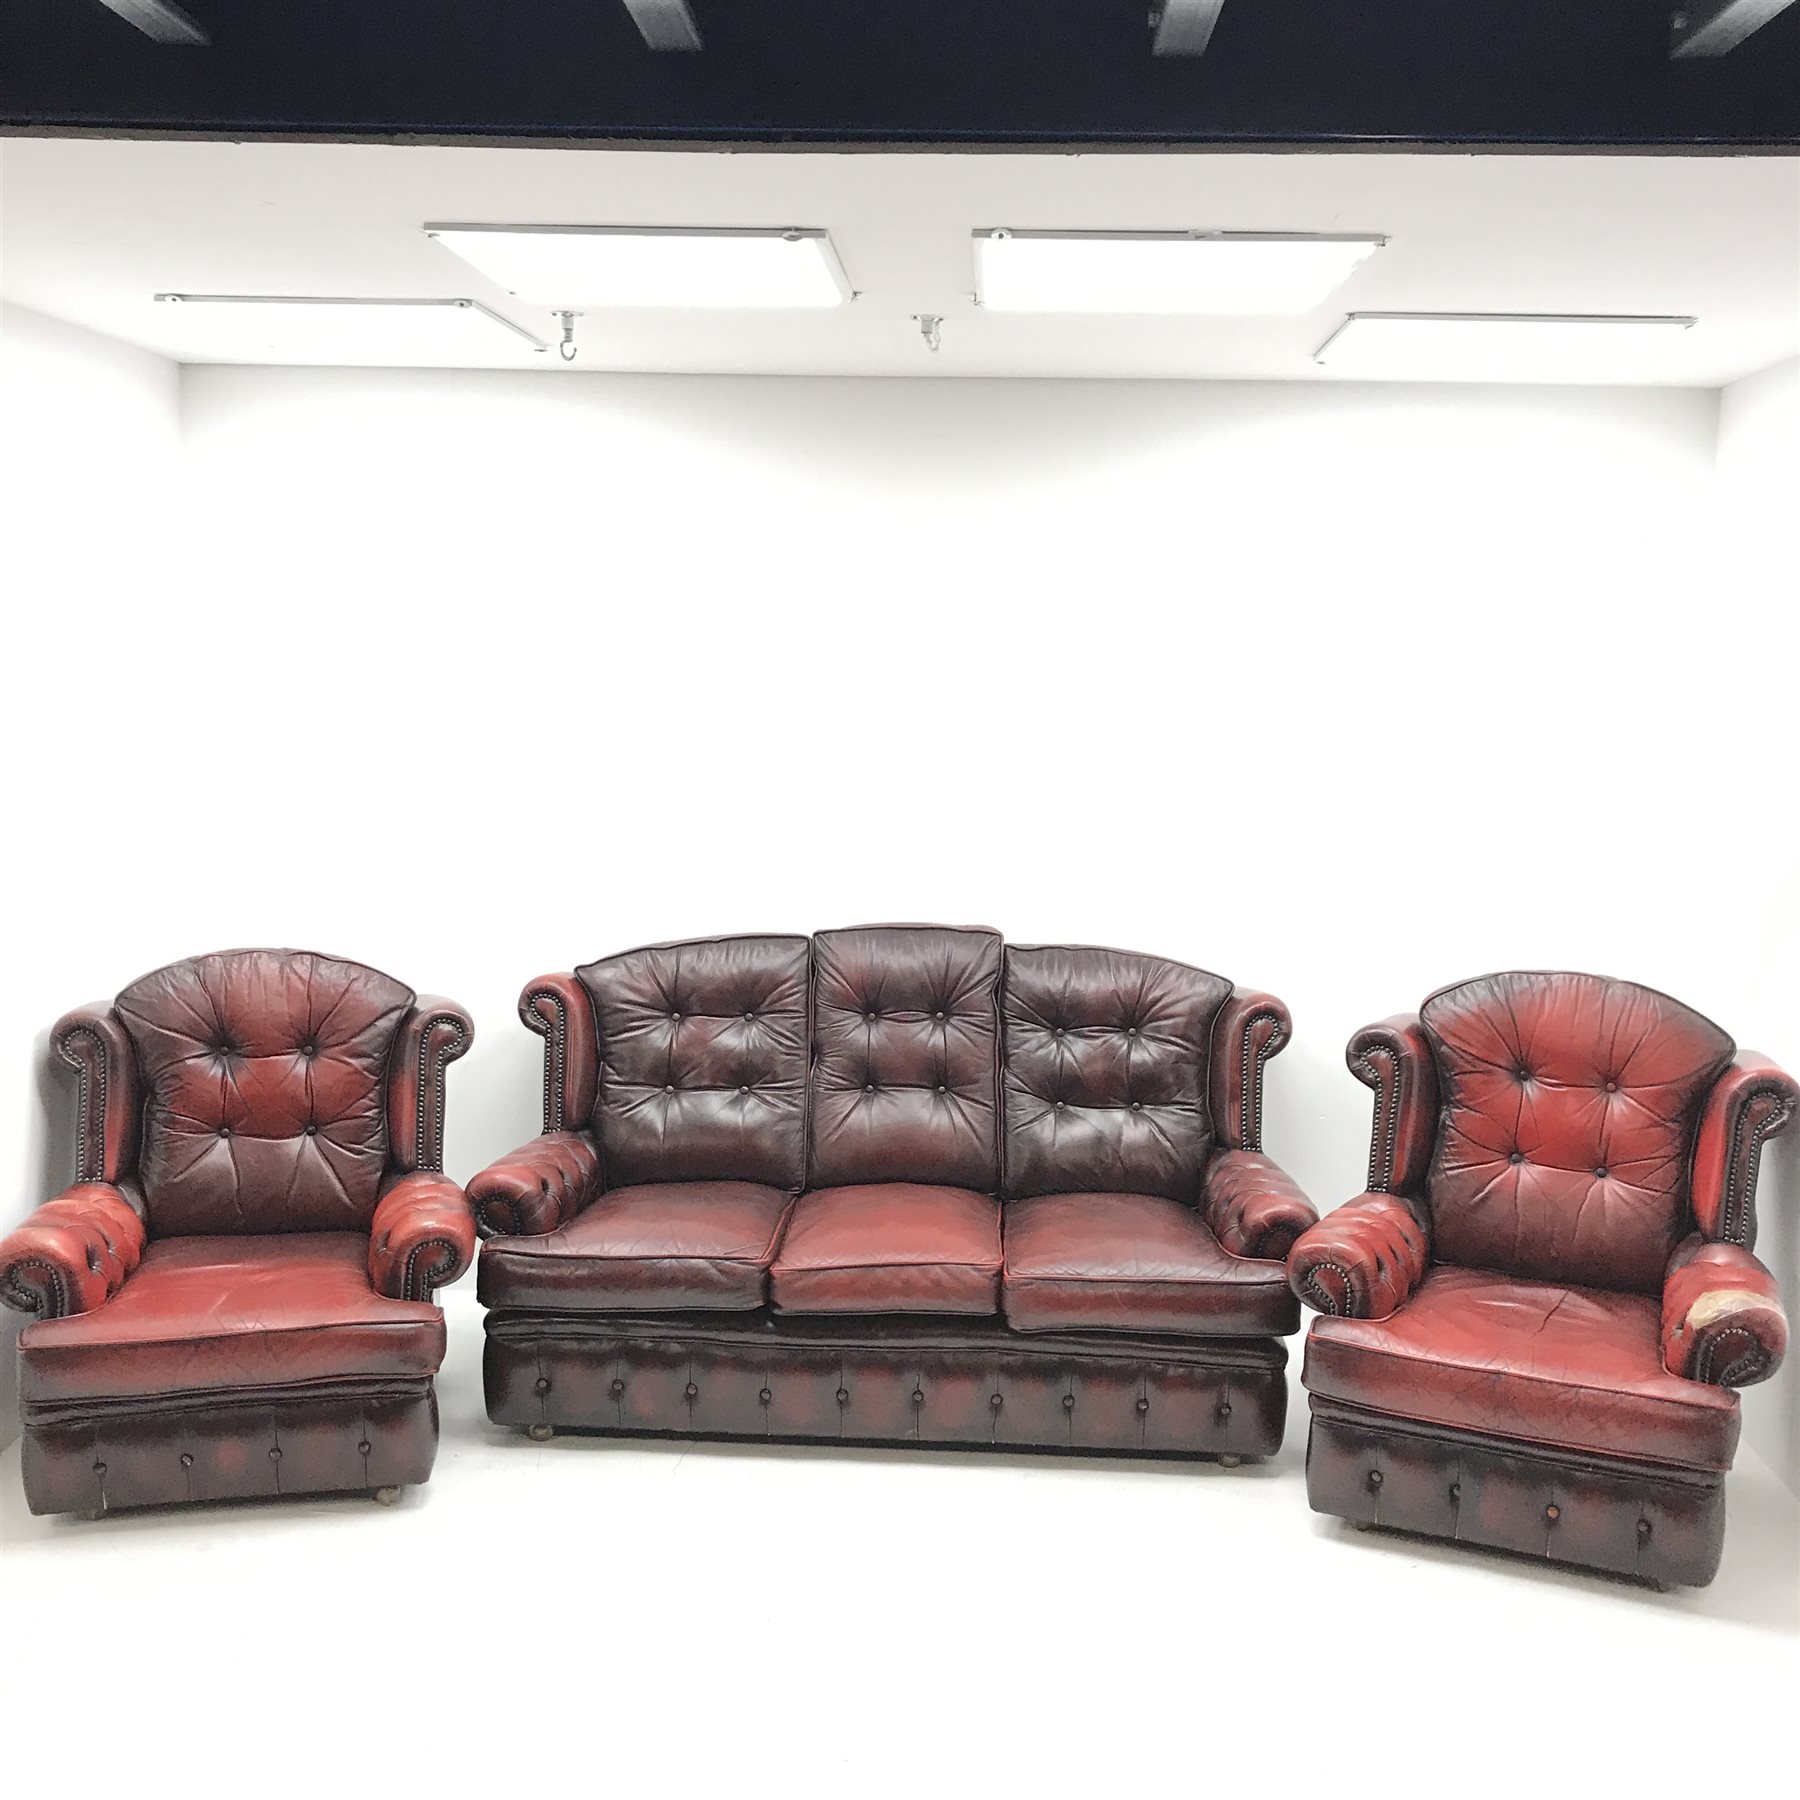 Georgian style three seat sofa upholstered in deep buttoned vintage red leather (W175cm) and pair of